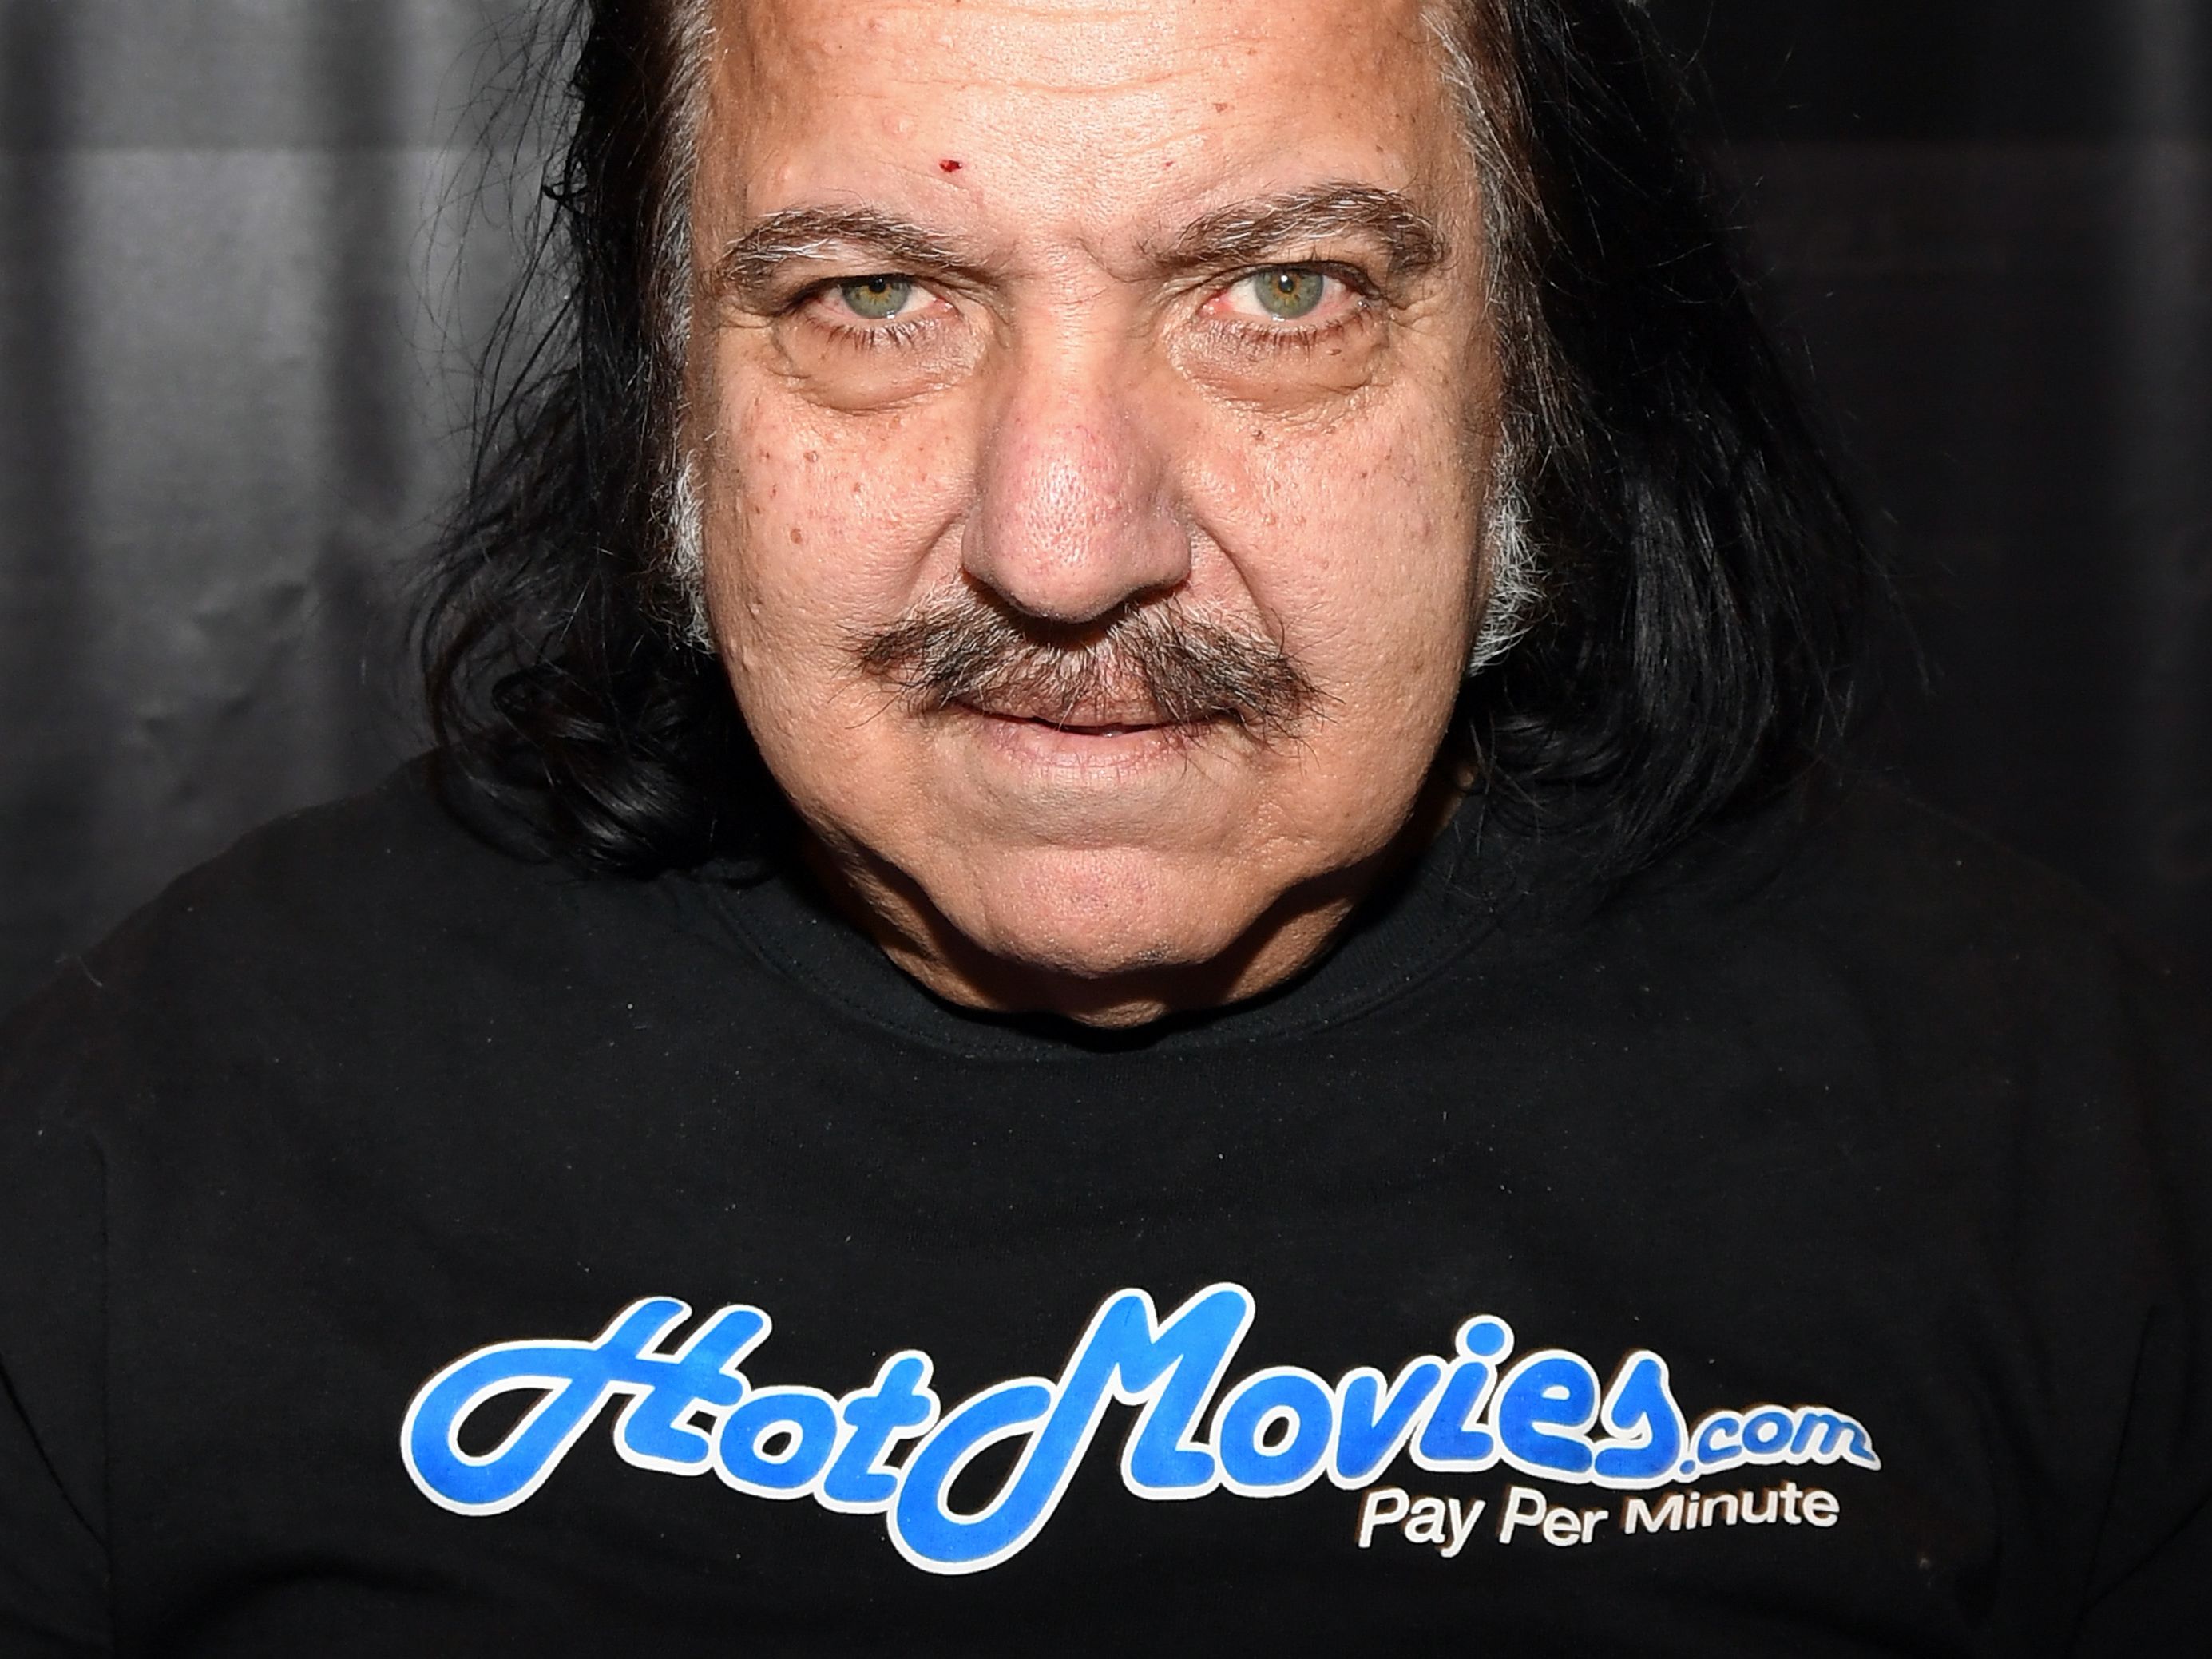 Xxx Rep Videos Chaina - Porn star Ron Jeremy faces 20 more sexual assault charges | CNN